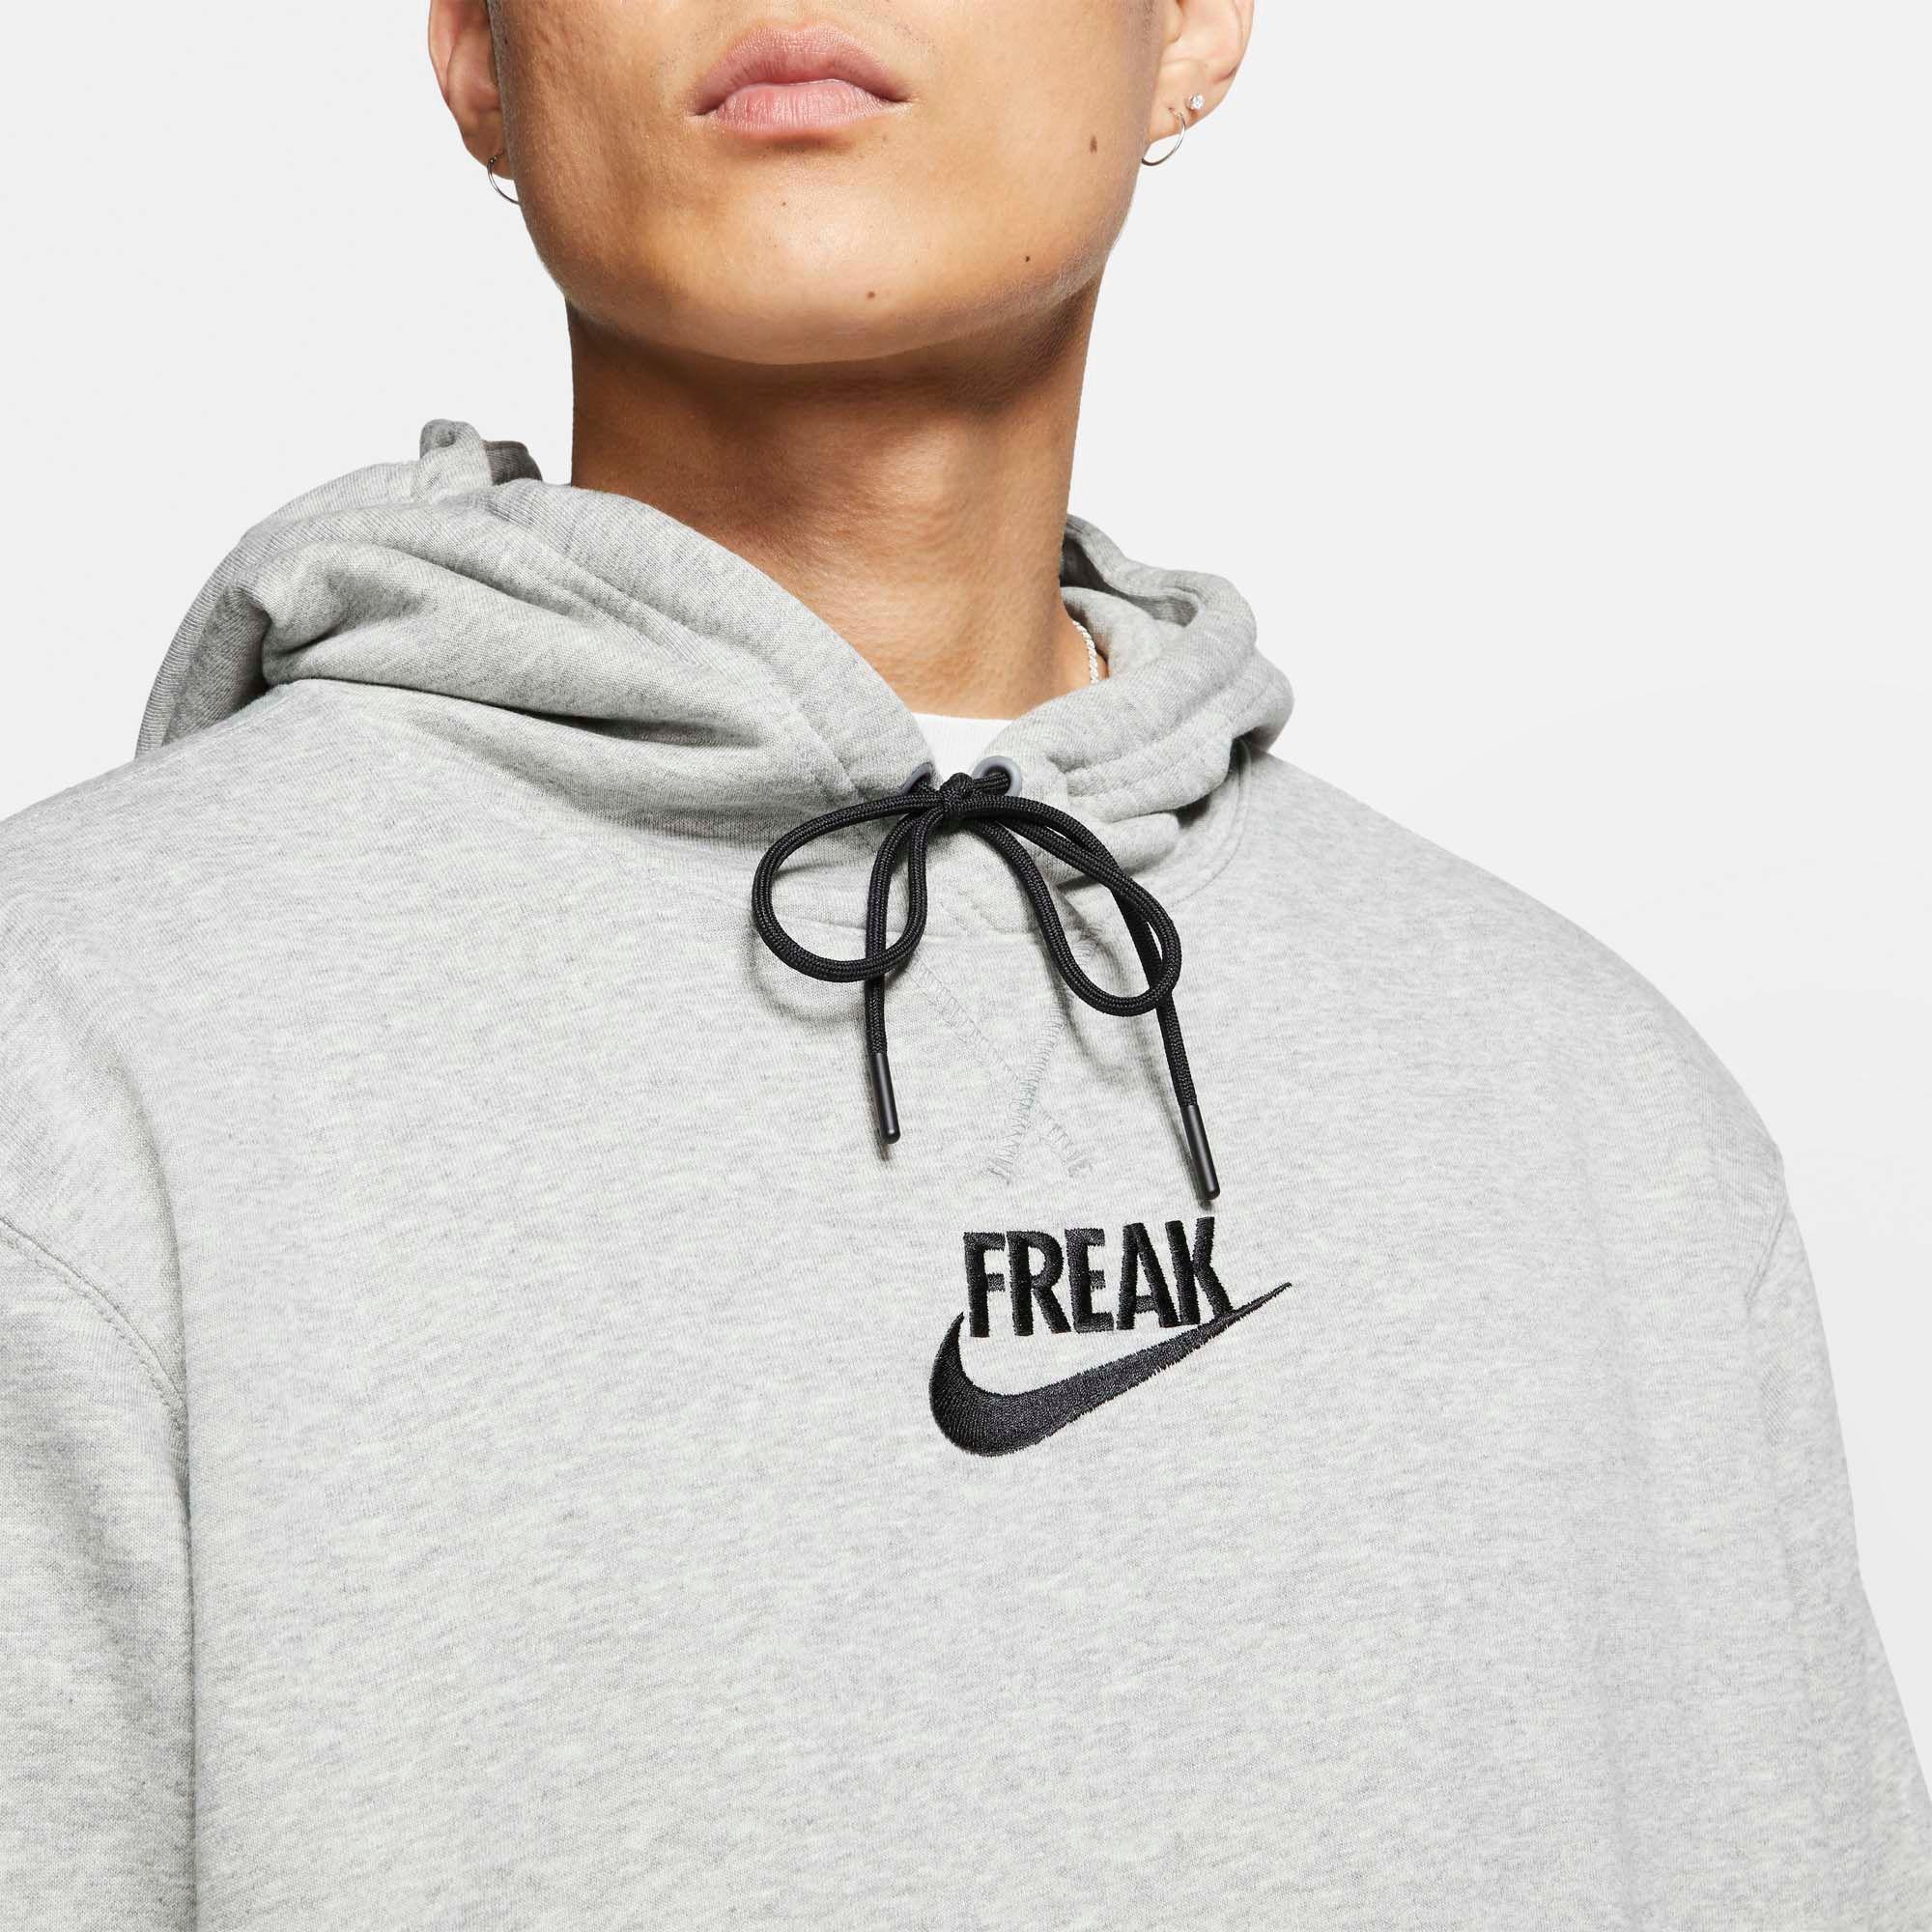 Purchase > freak hoodie nike, Up to 79% OFF